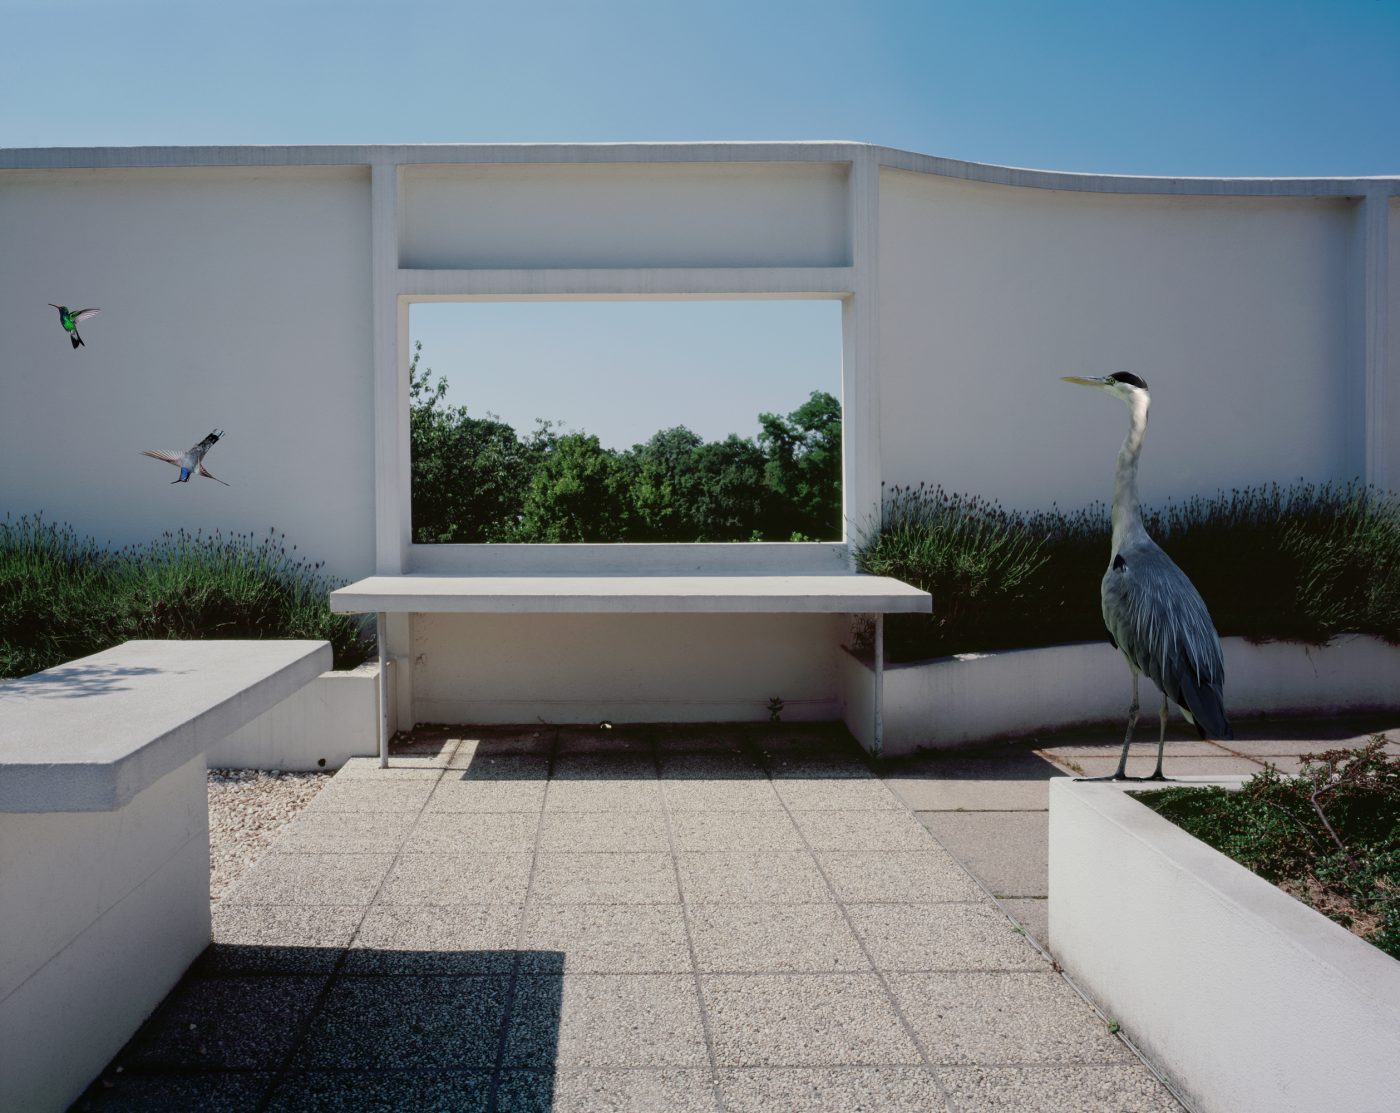 Karen Knorr: Rooftop, photographed atop Le Corbusier’s Villa Savoye, is part of the “Fables,” 2003–8, series.